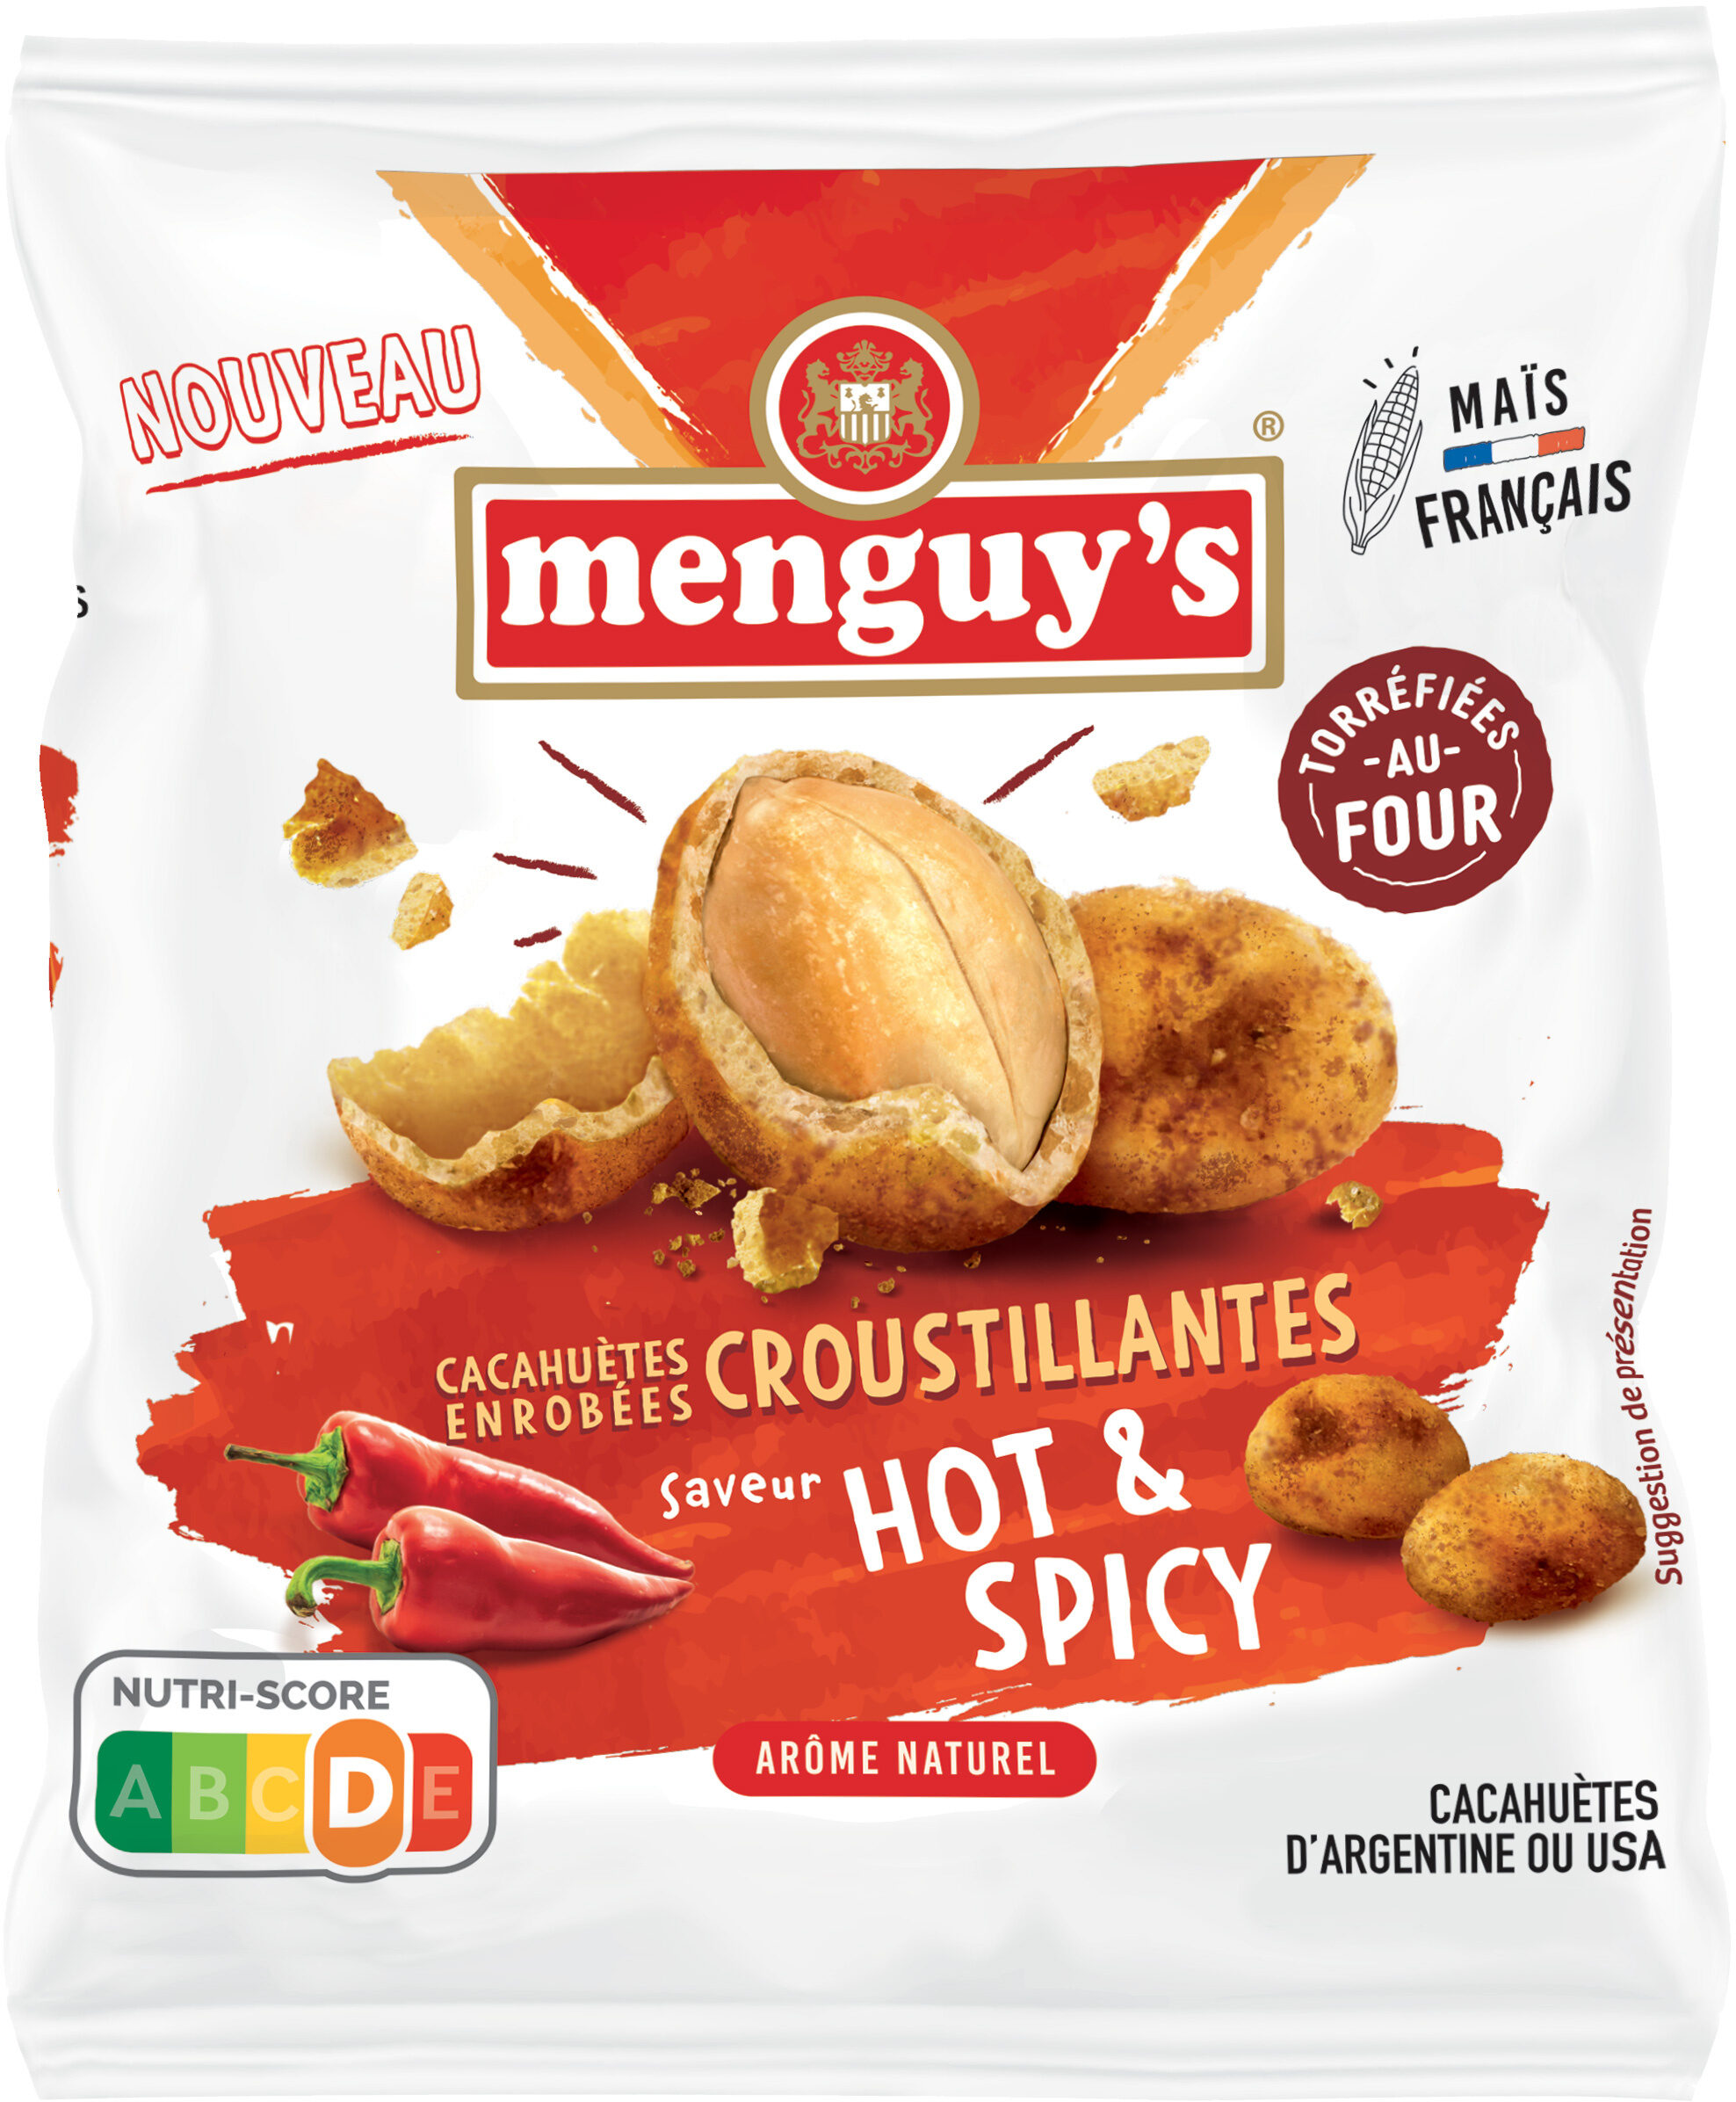 Menguy's cacahuetes enrobees hot & spicy 170 g - Produit